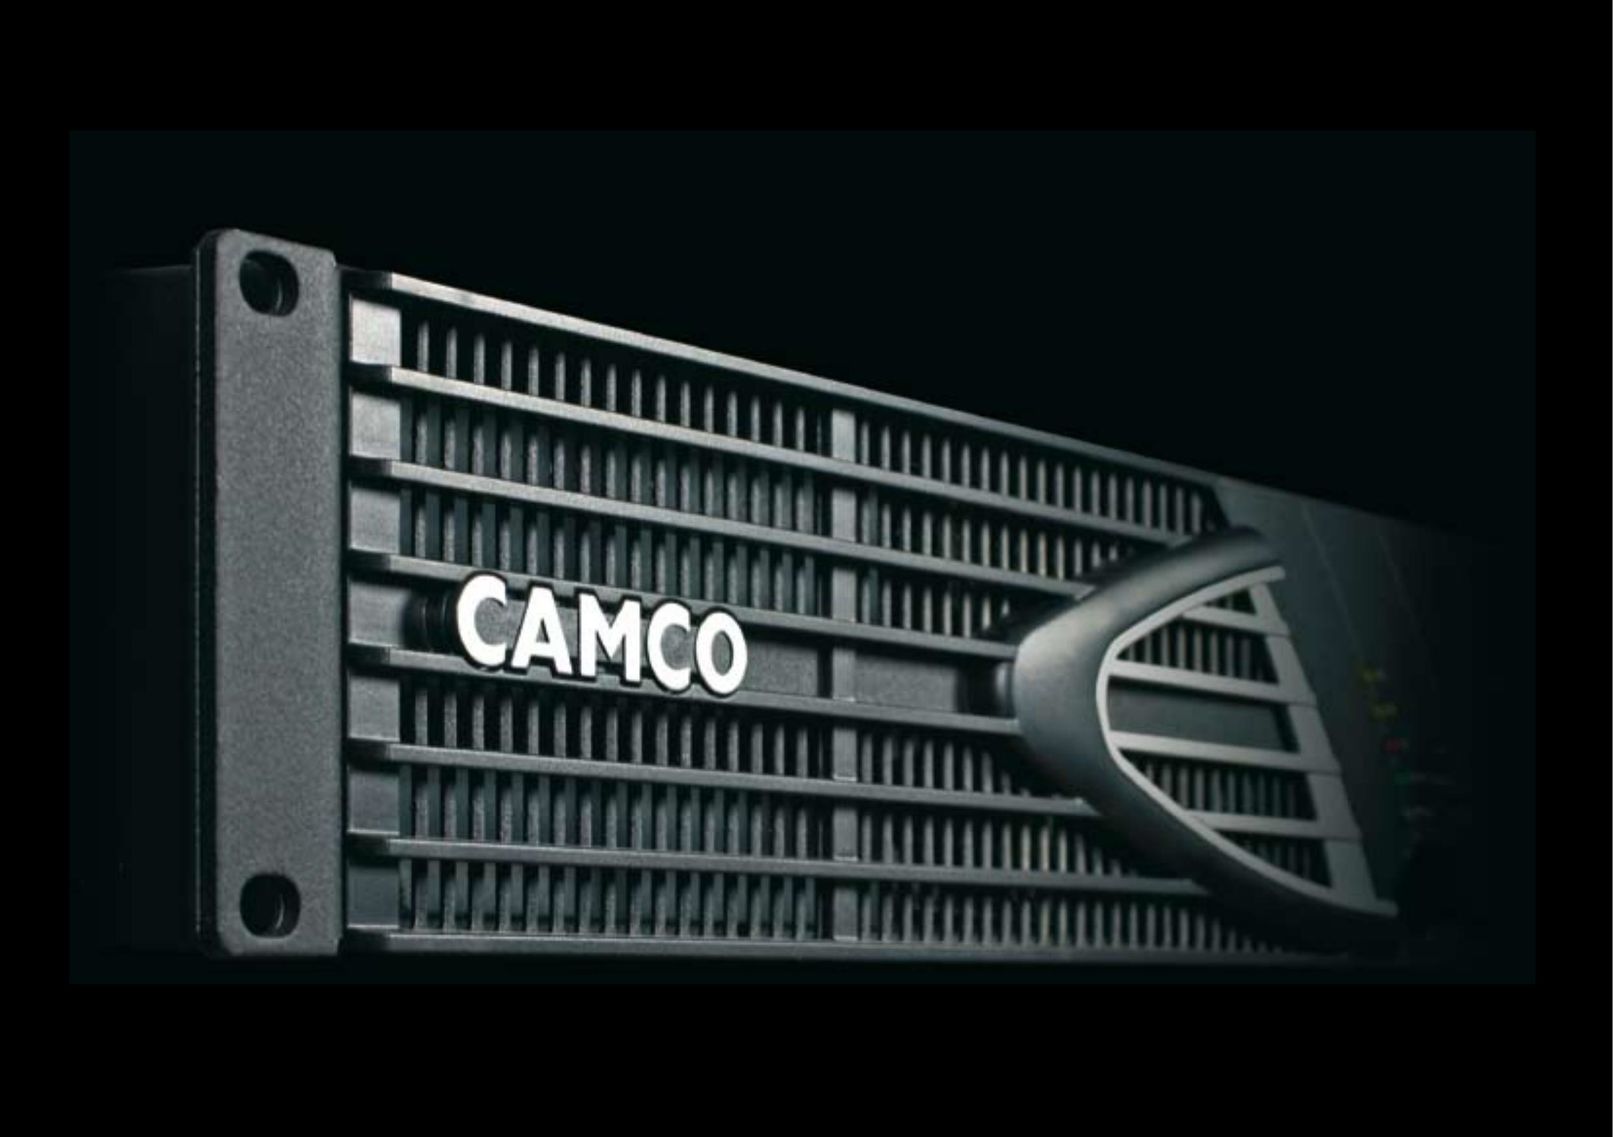 Camco P.6 Series Stereo Amplifier User Manual